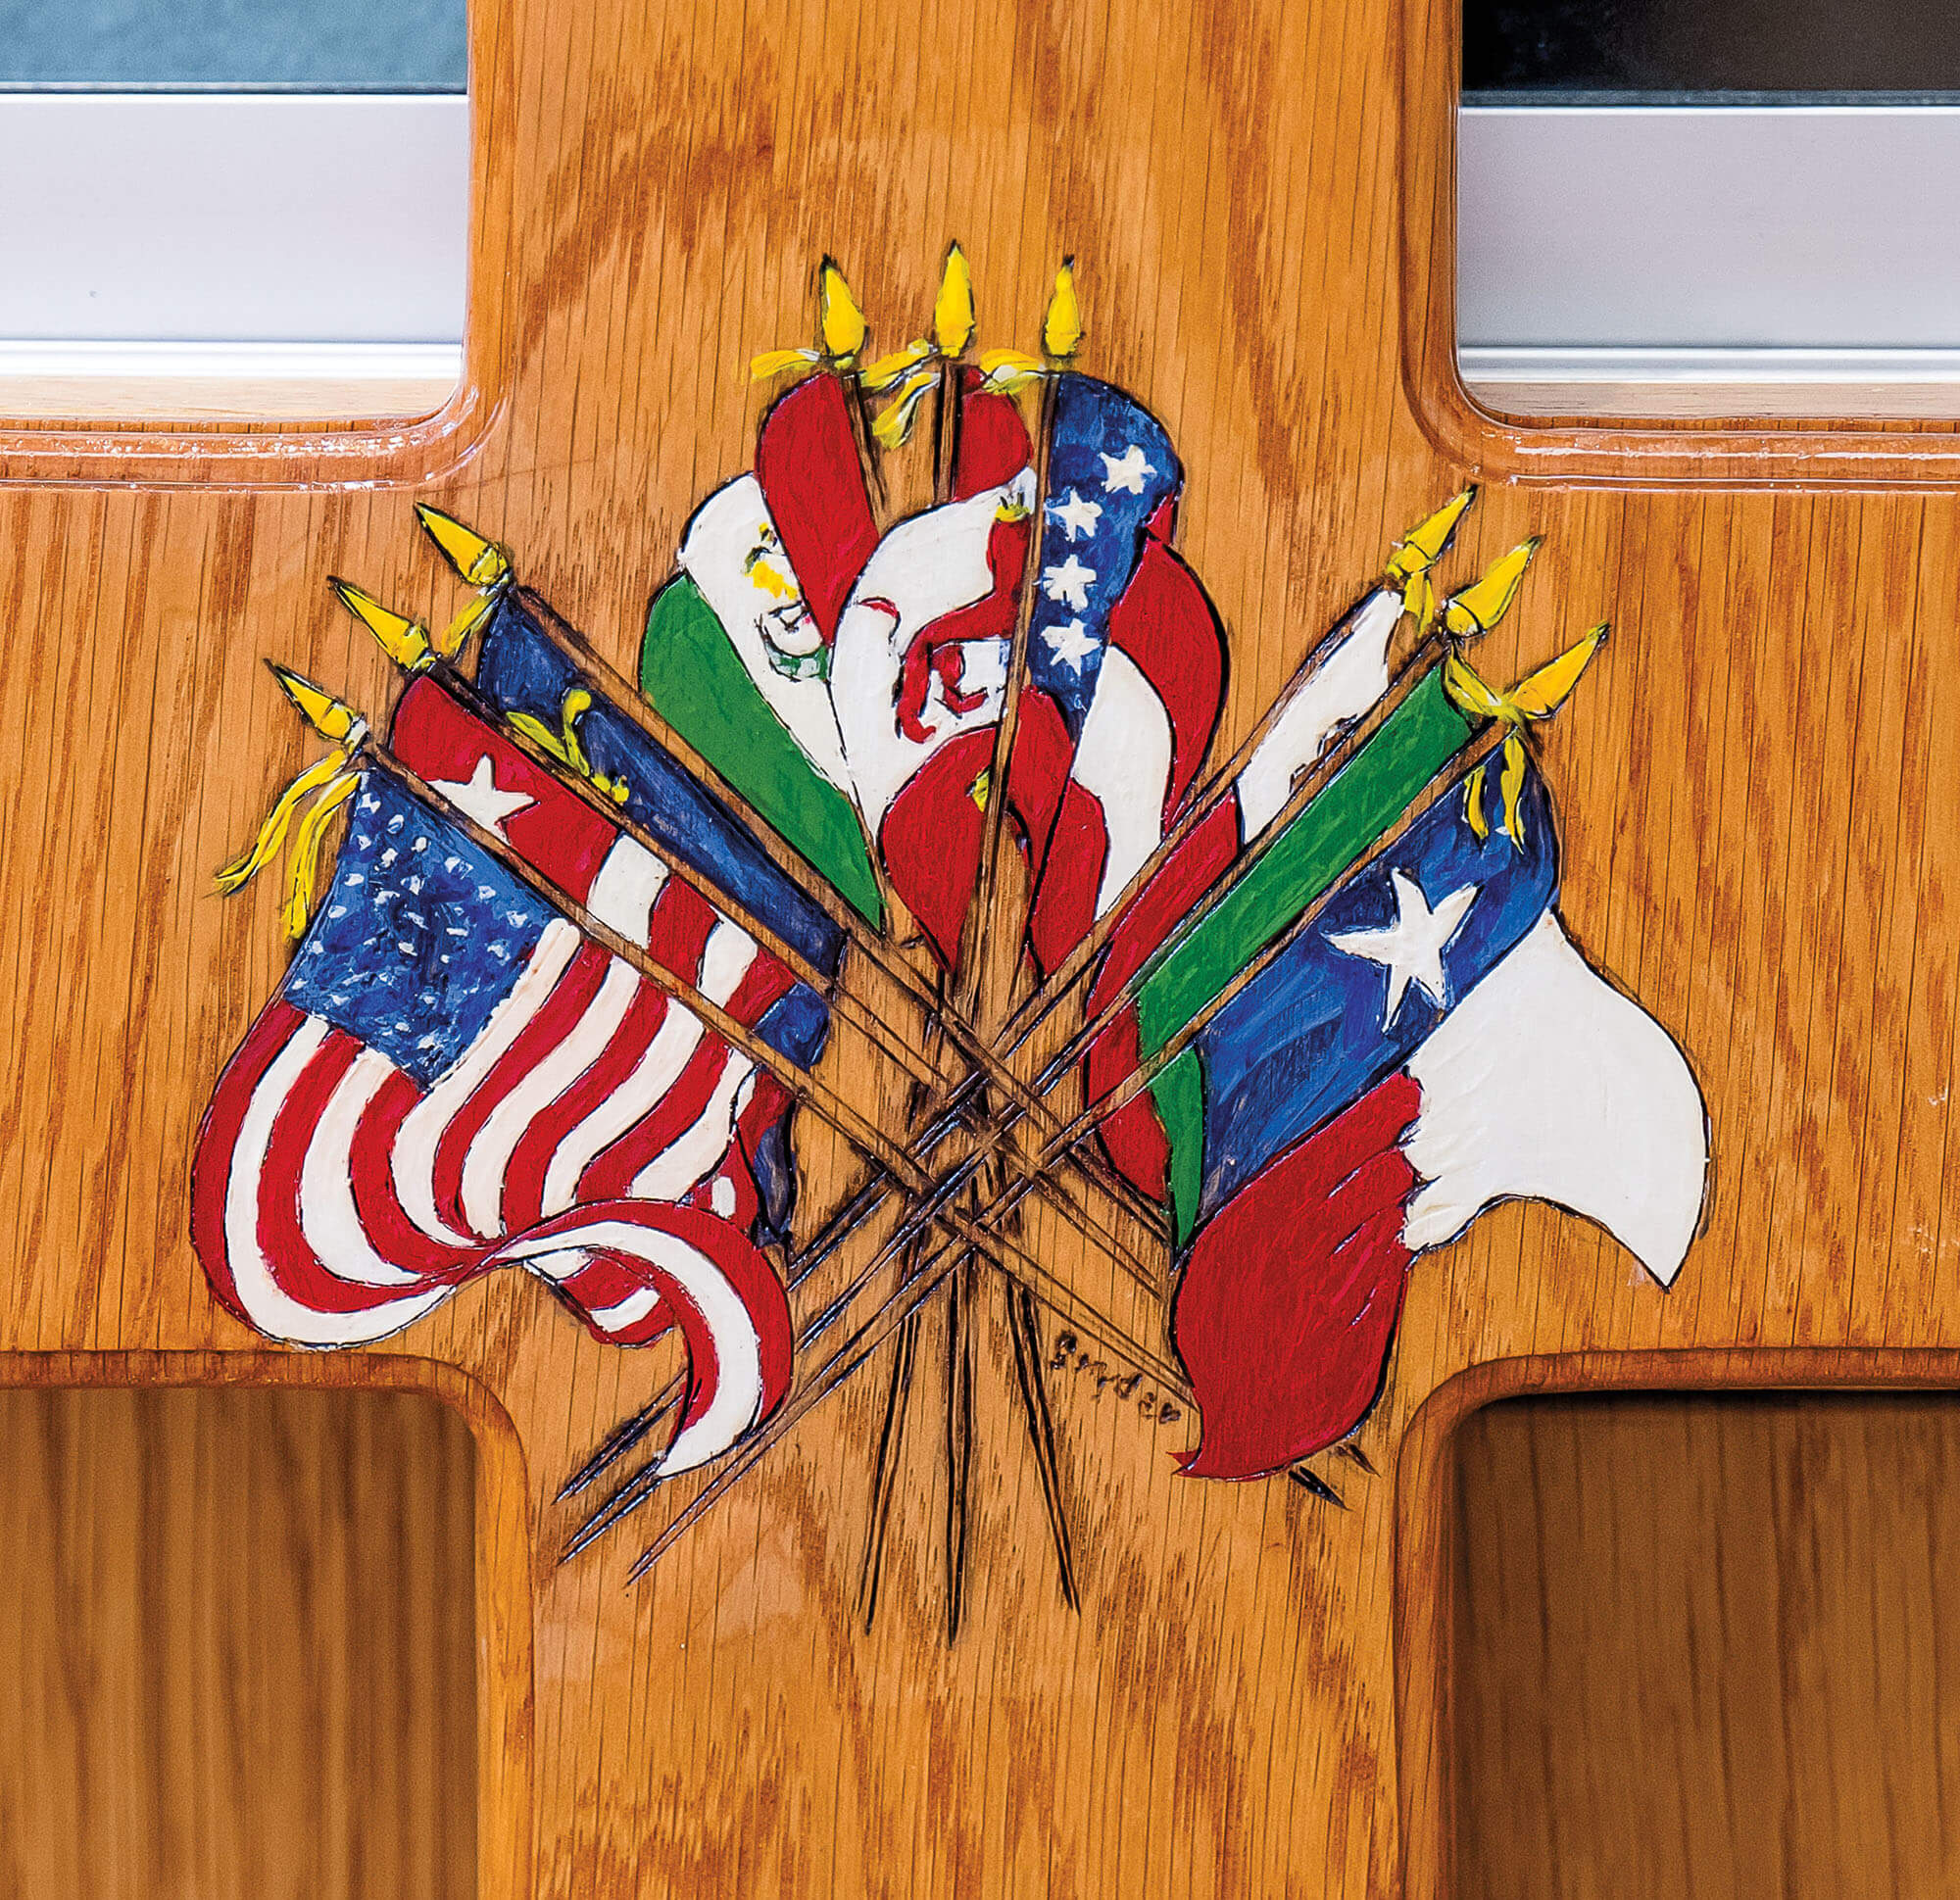 A painting of nine flags on a wooden door